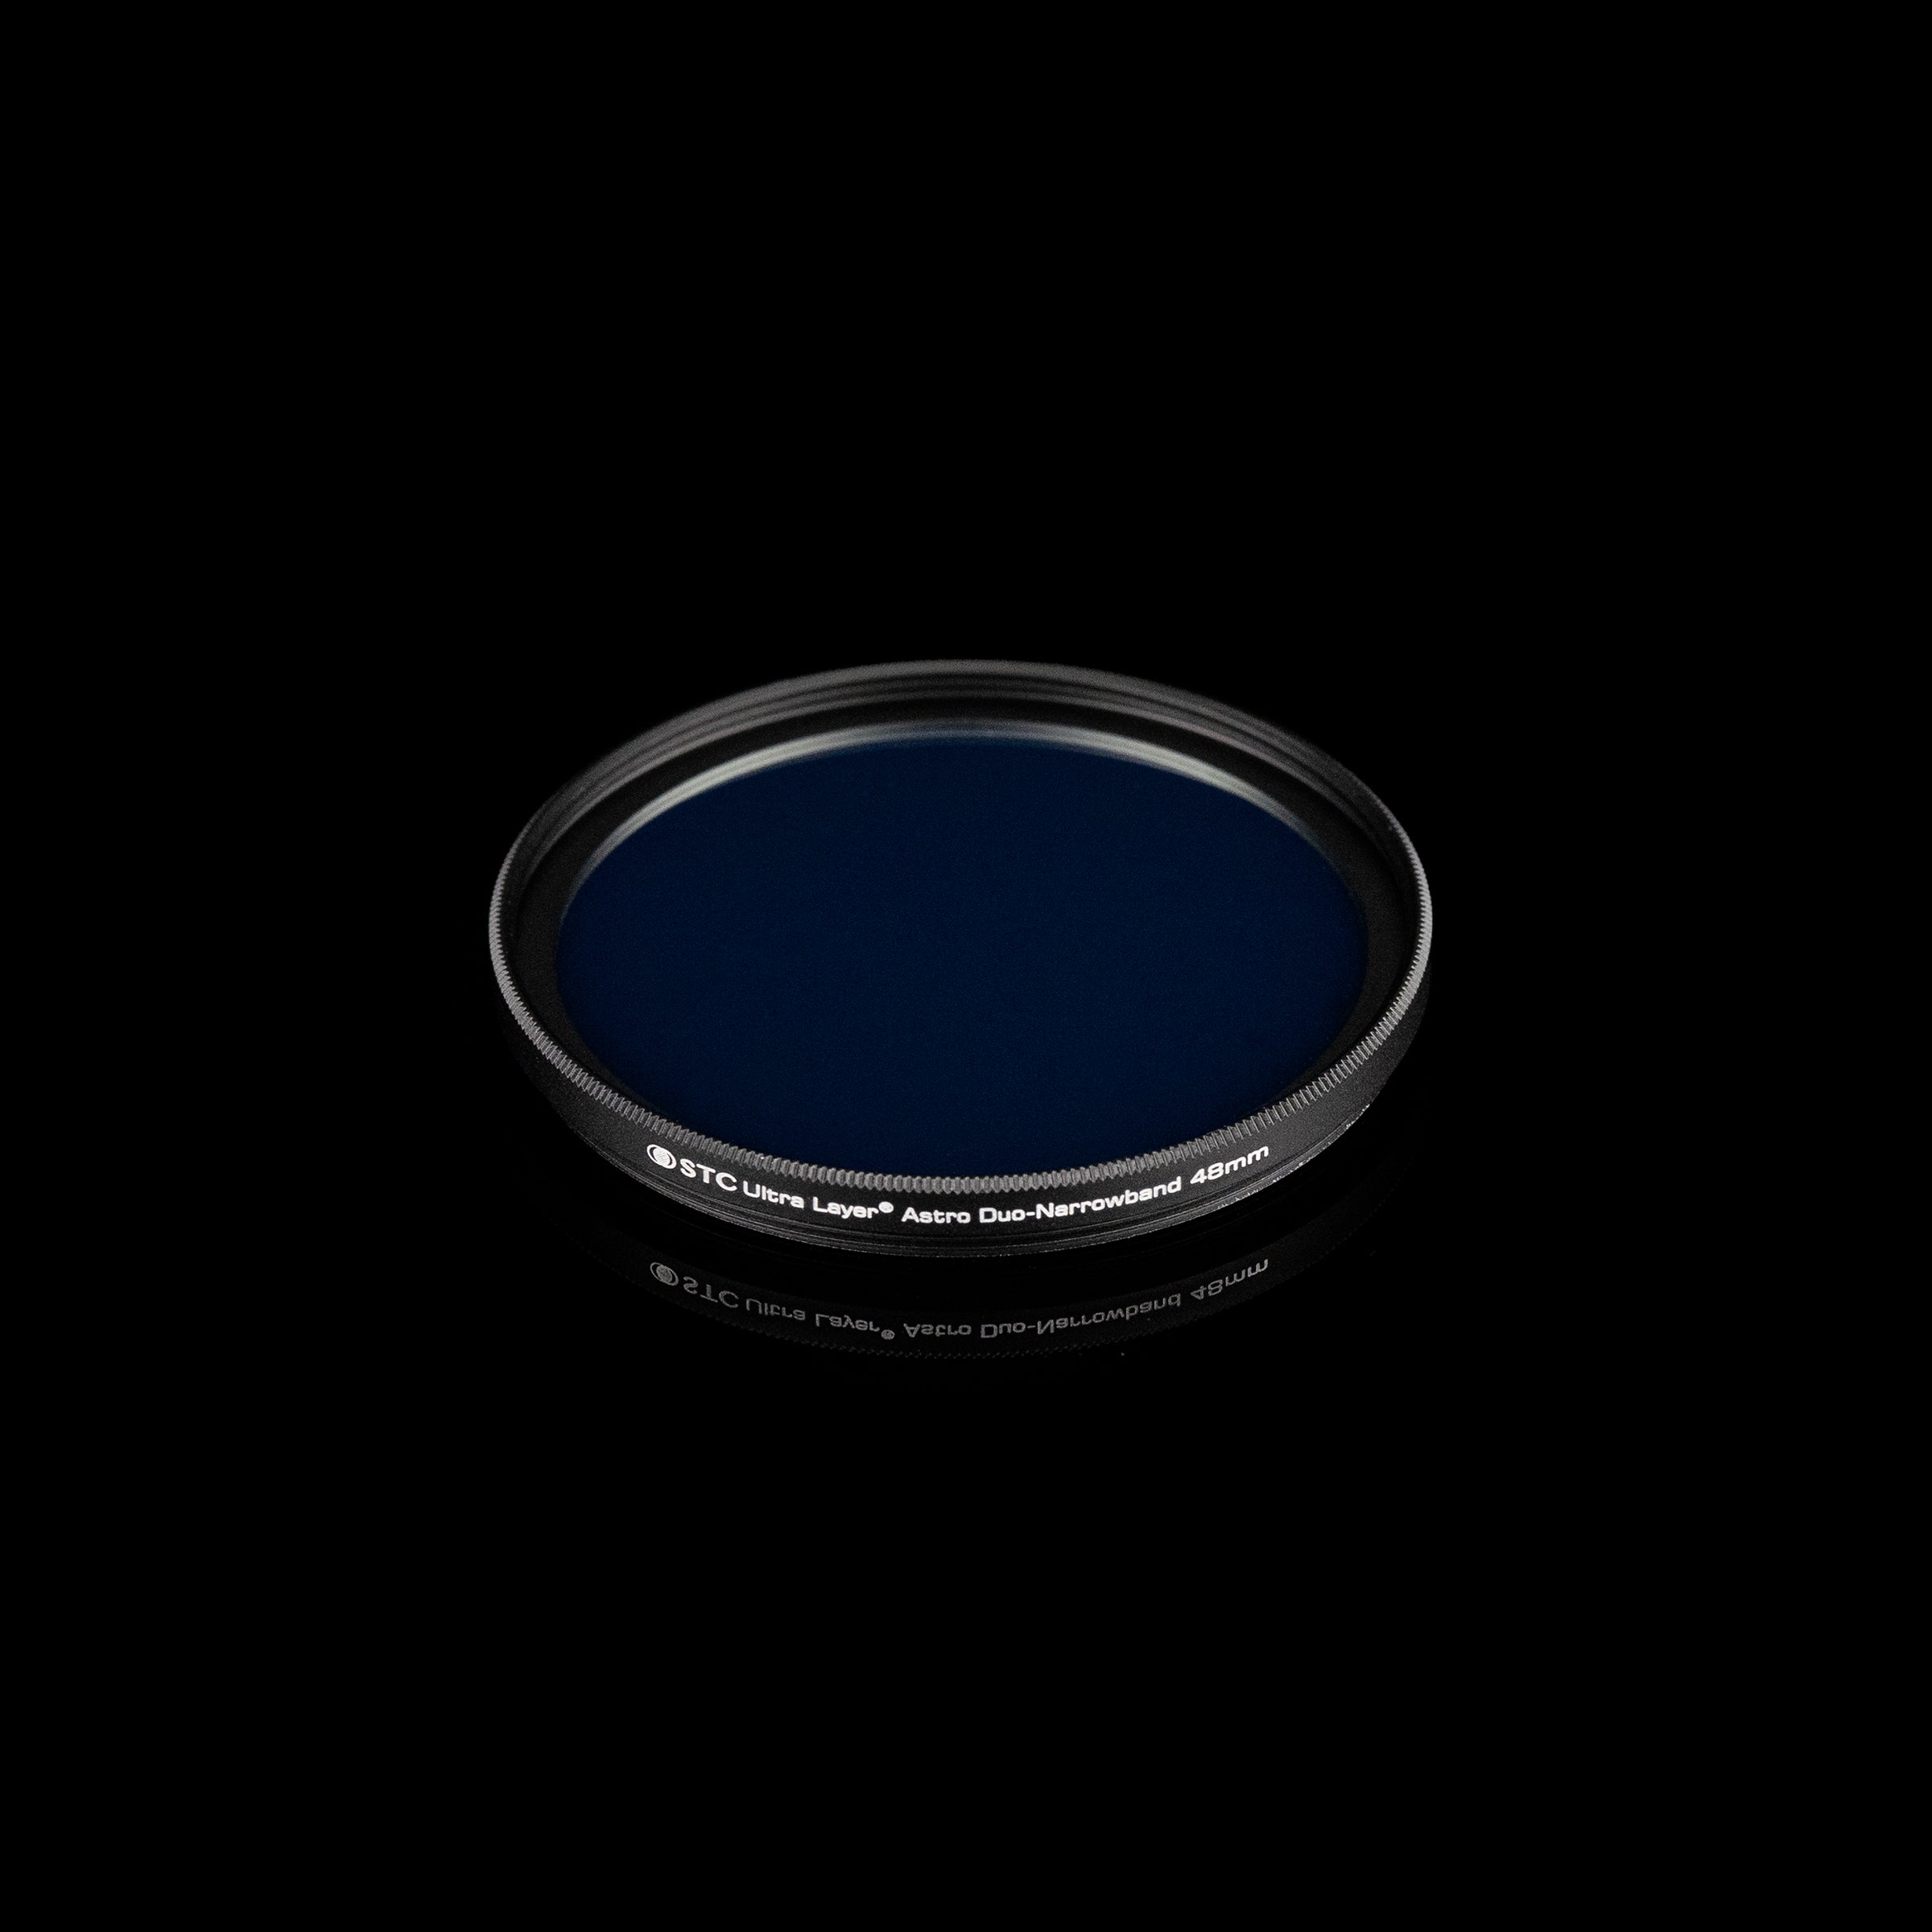 STC Astro Duo-Narrowband Filter